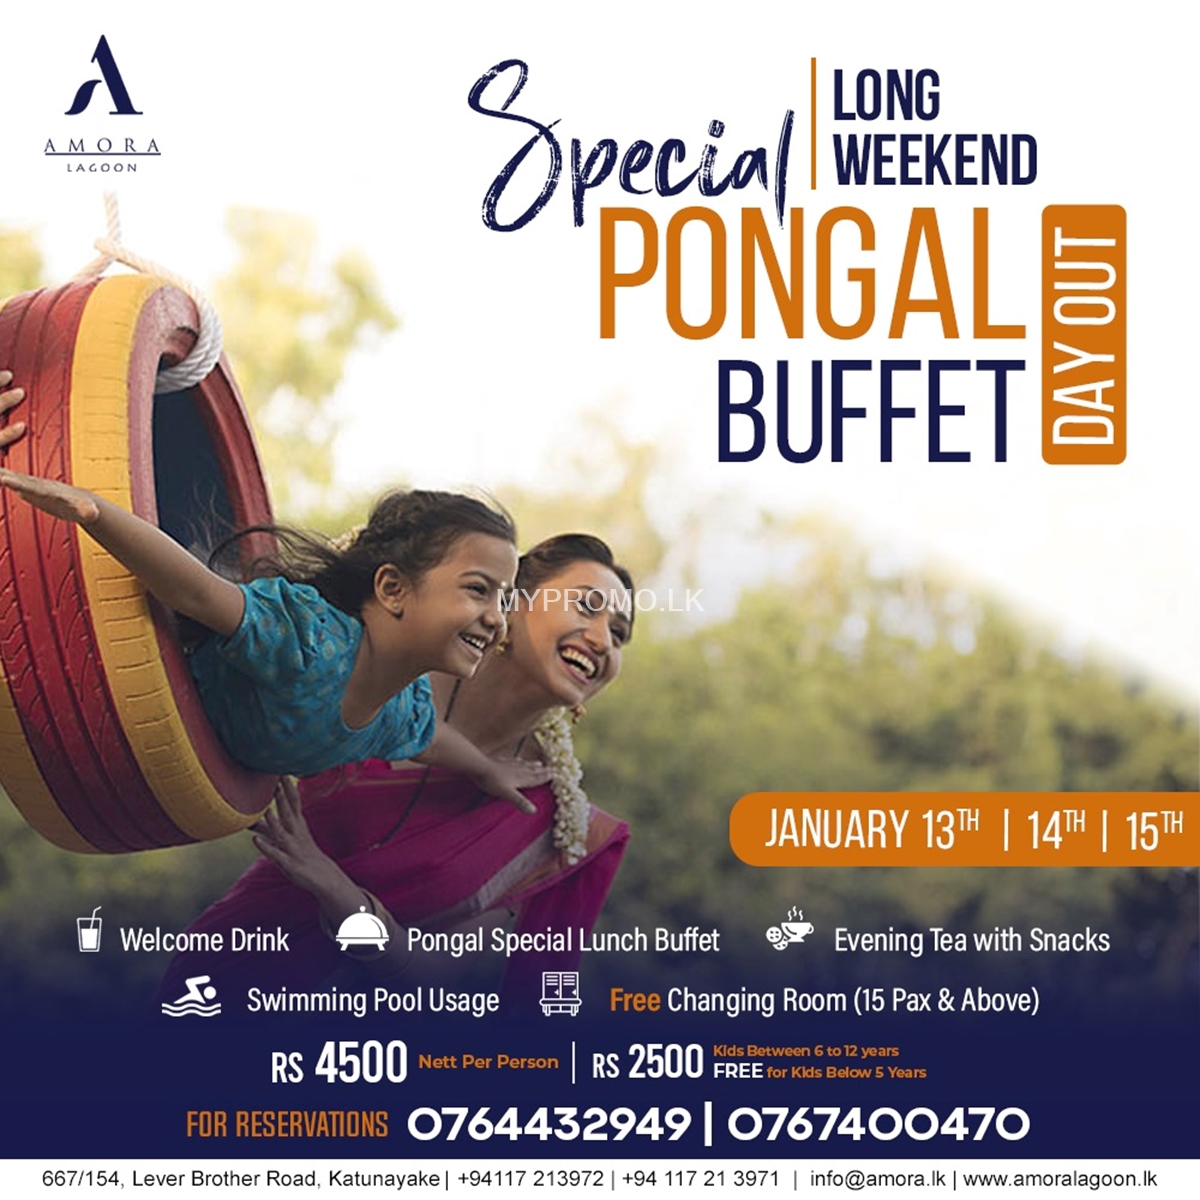 Join us for a special Pongal buffet at Amora Lagoon